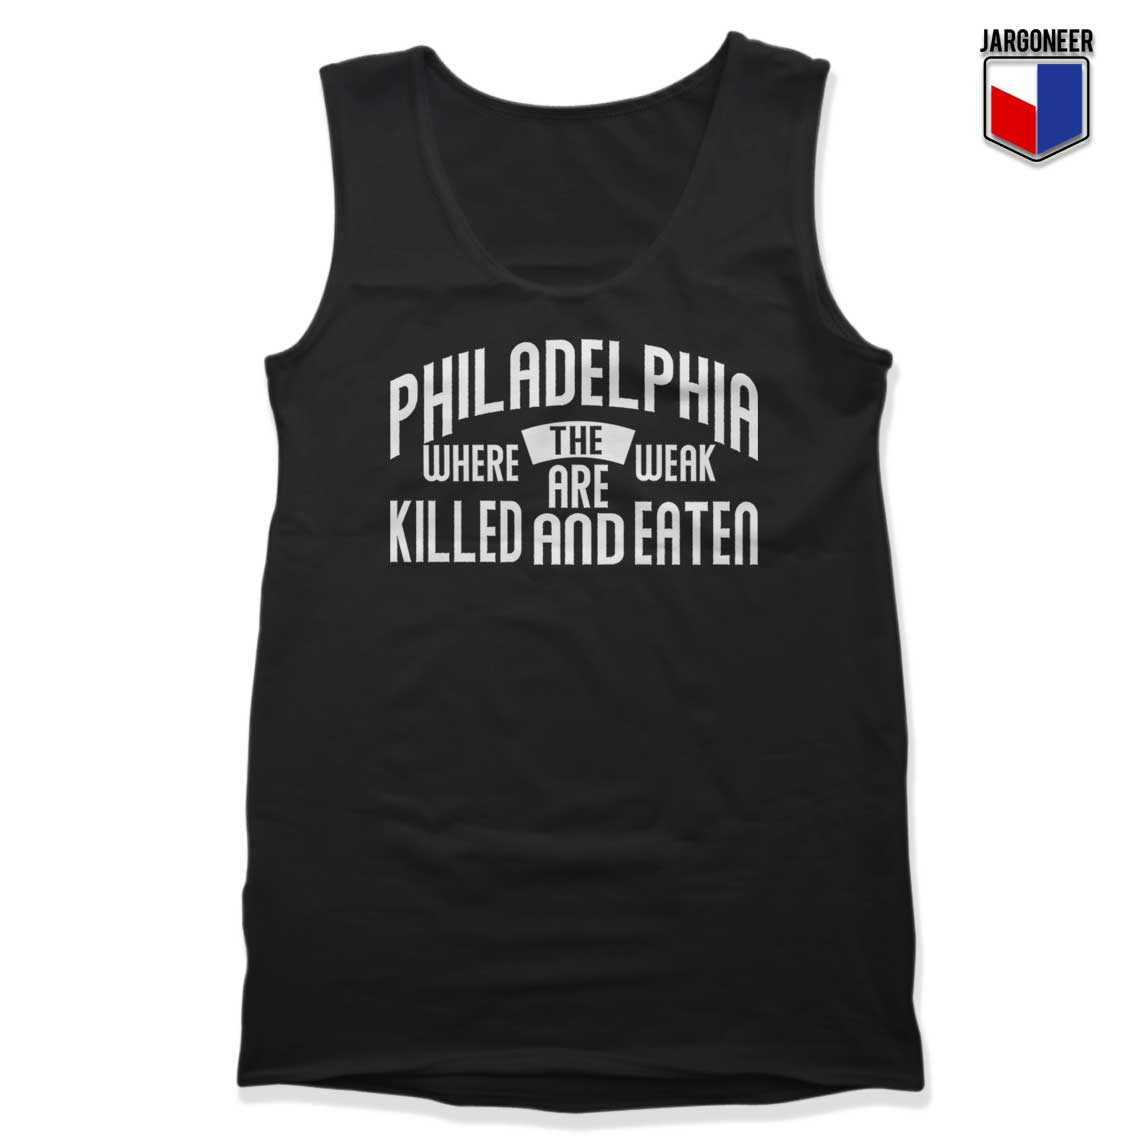 PHILADELPHIA WHERE THE WEAK ARE KILLED AND EATEN Tank Top - Shop Unique Graphic Cool Shirt Designs